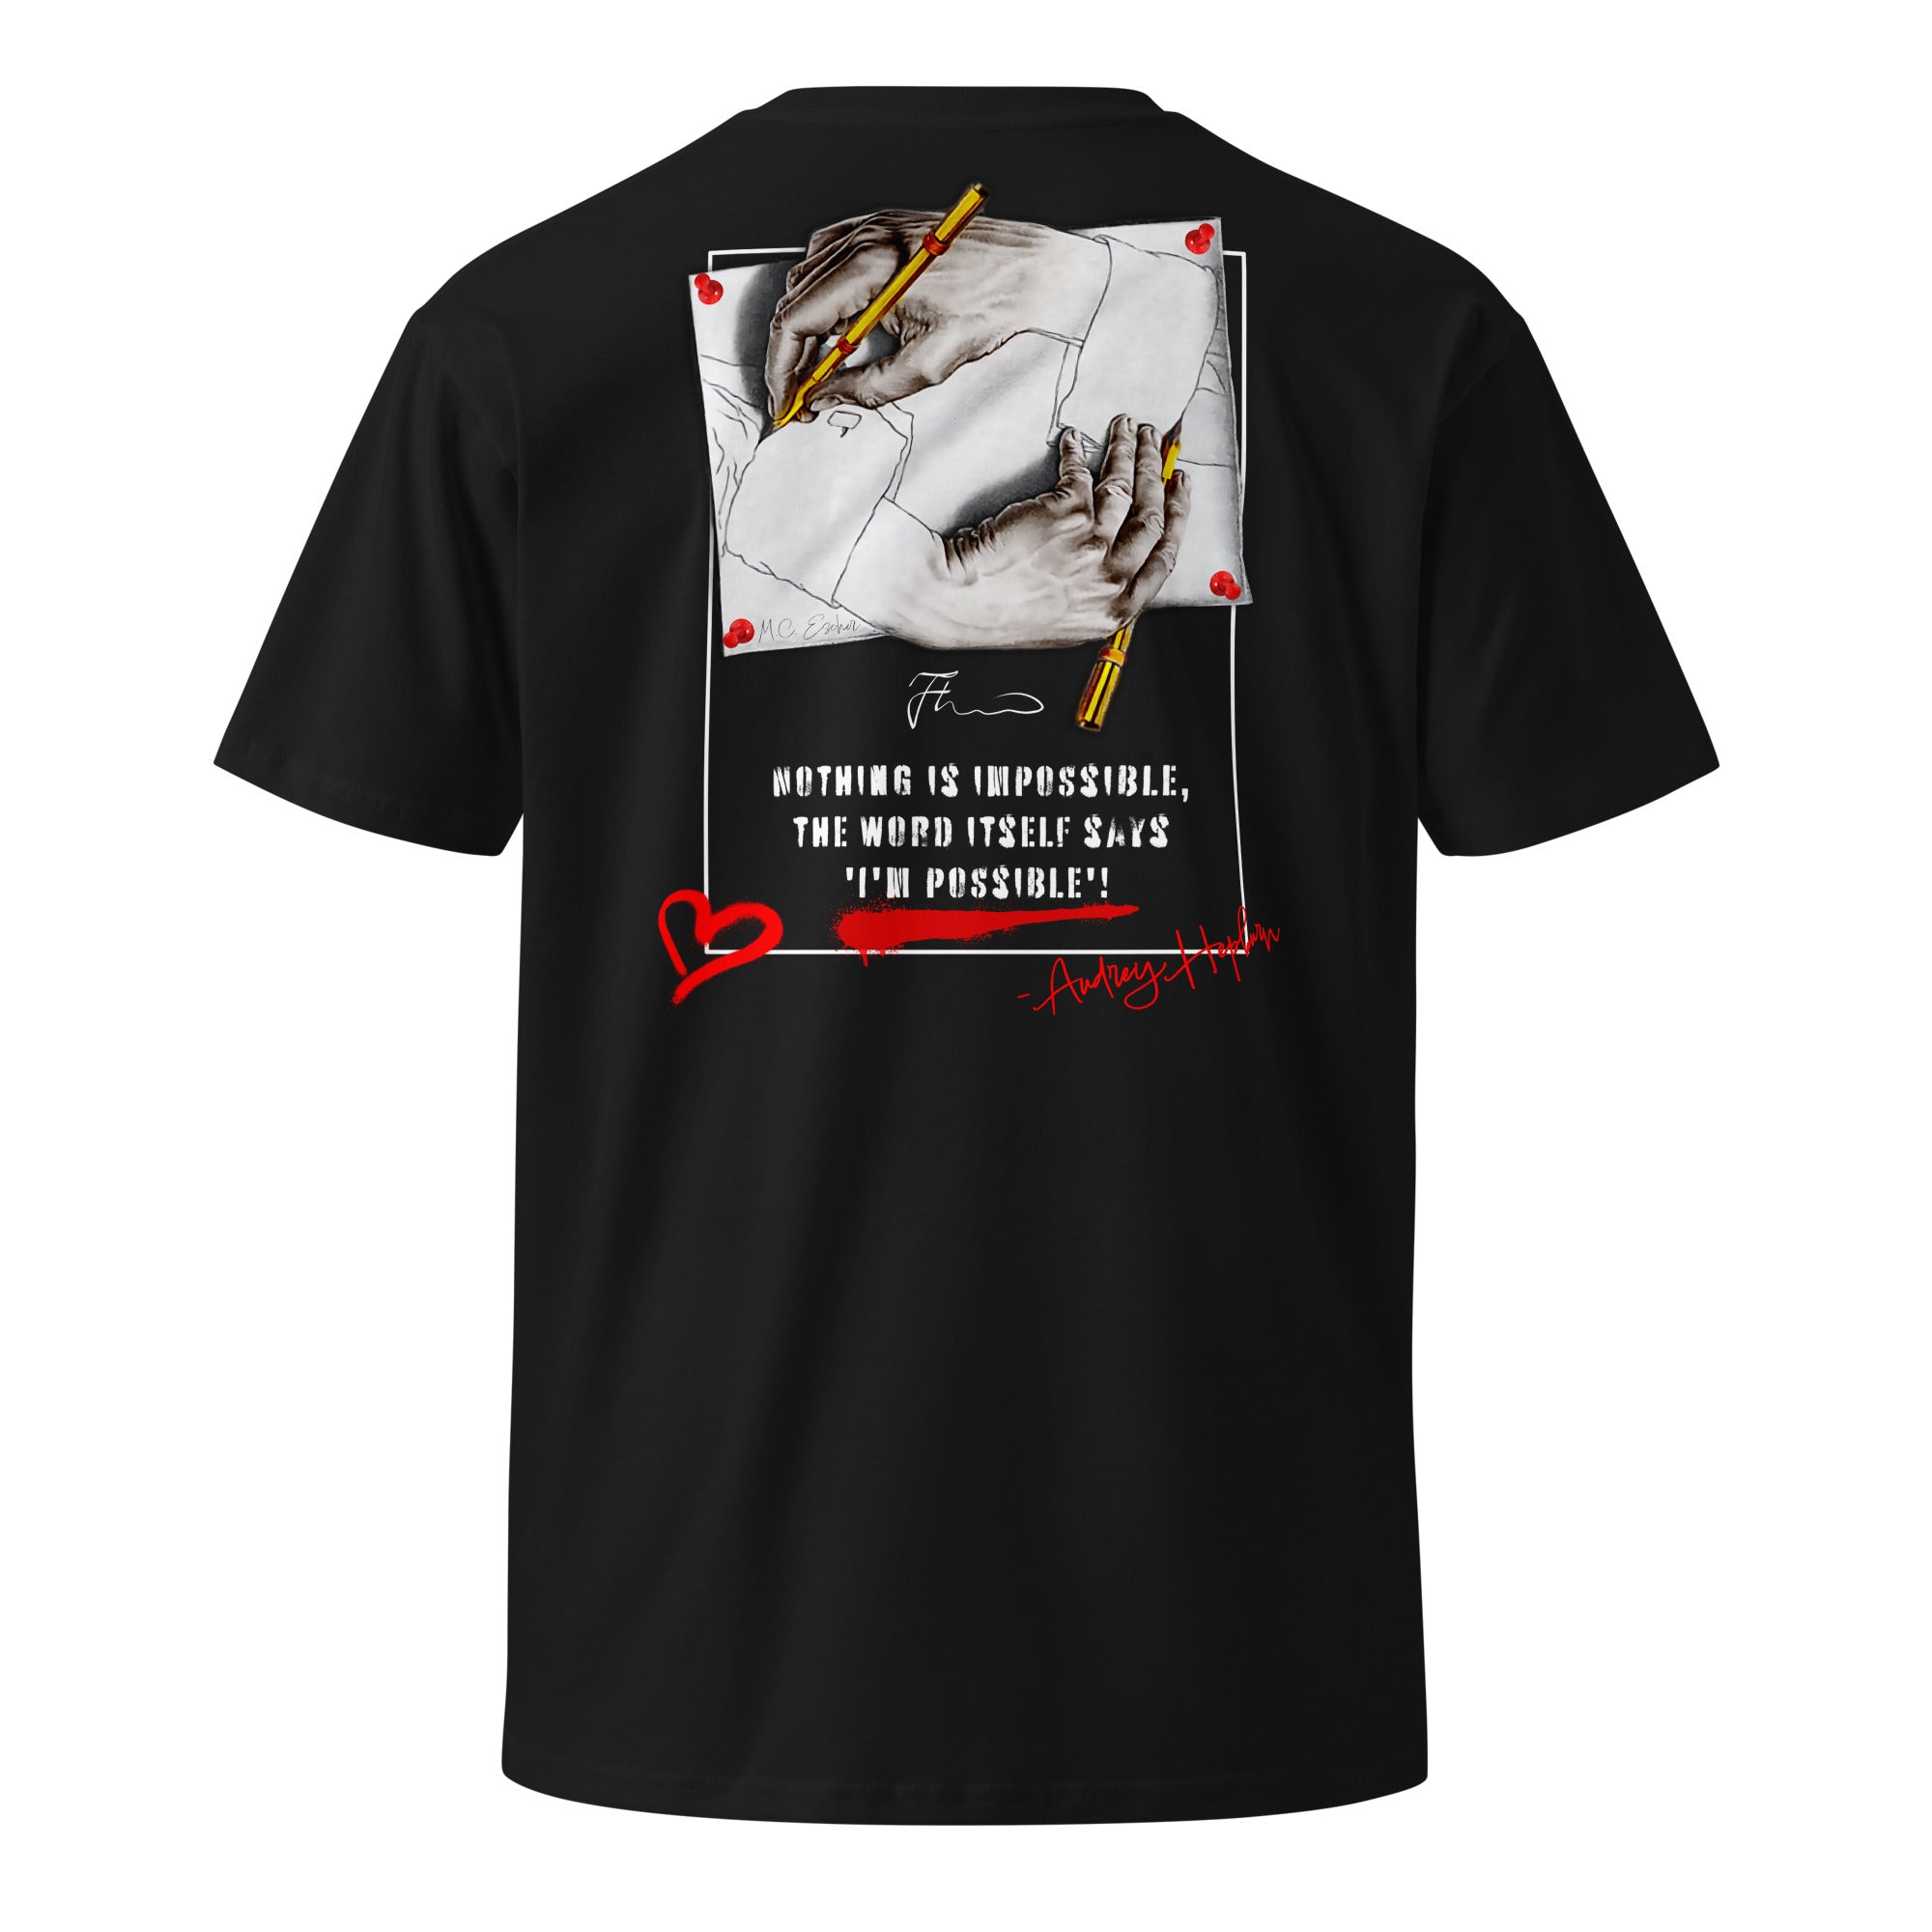 Flex-Tonic Premium "Nothing is impossible, the word itself said I'm possible" t-shirt